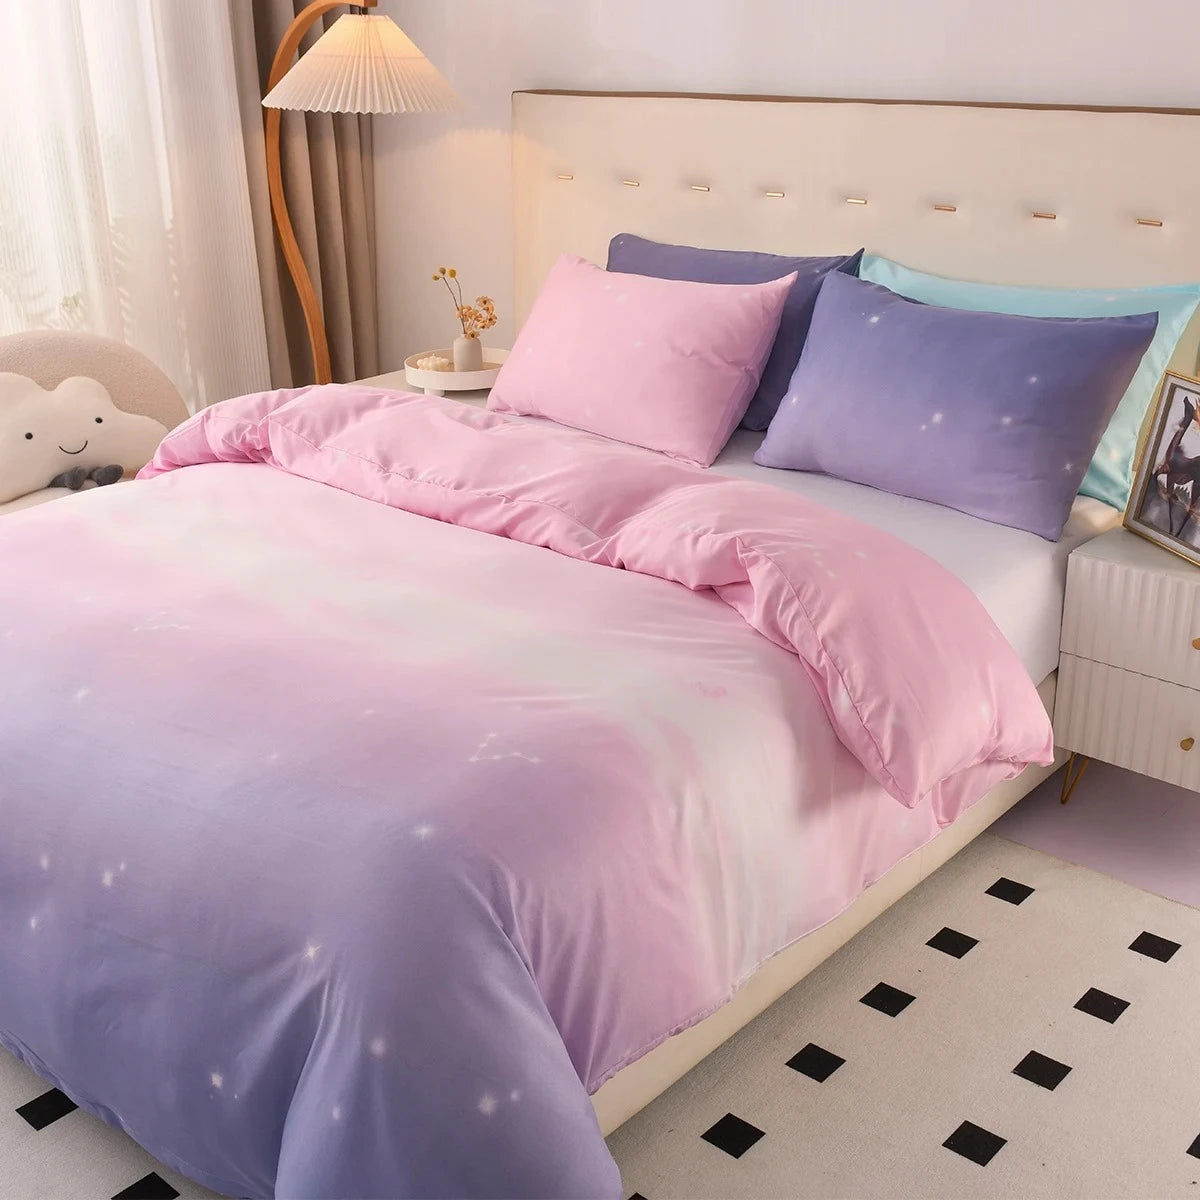 Bed featuring a Pink and Purple Bedding set on it